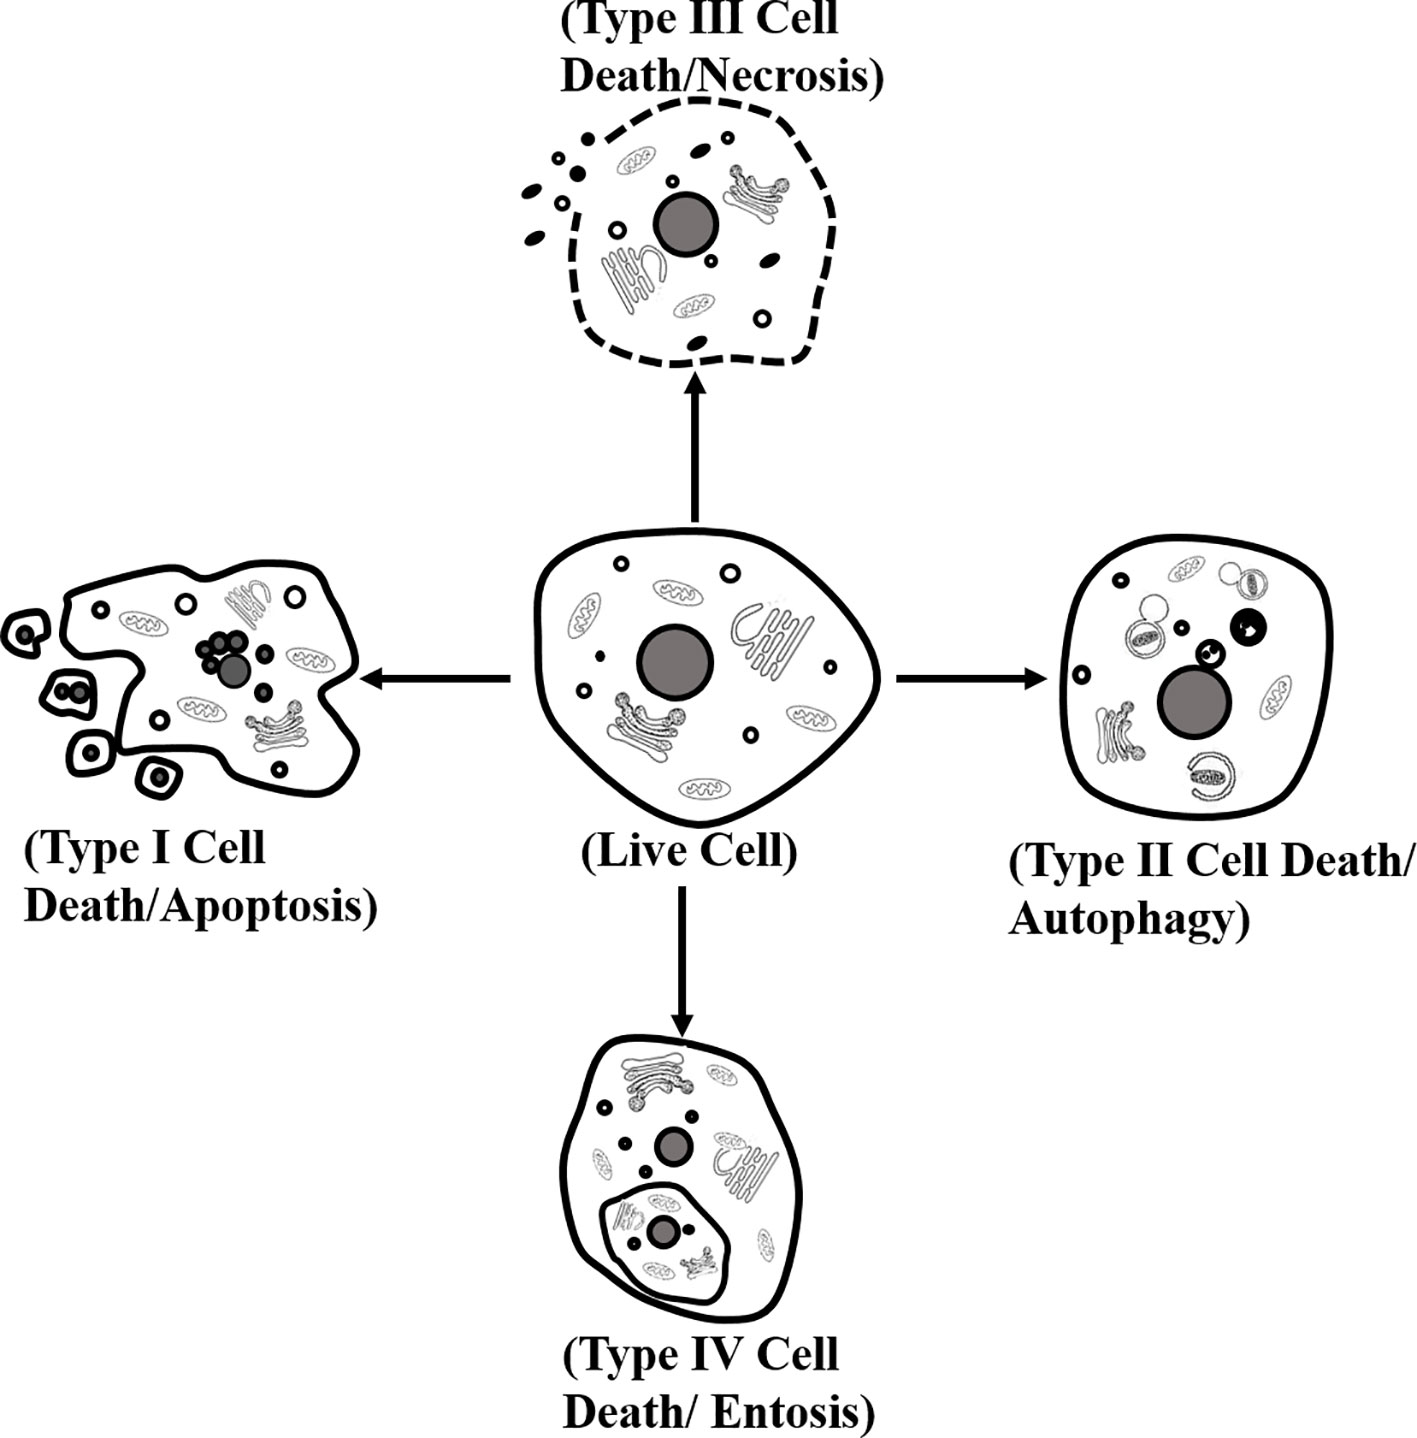 Types of cell death according to the Nomenclature Committee on